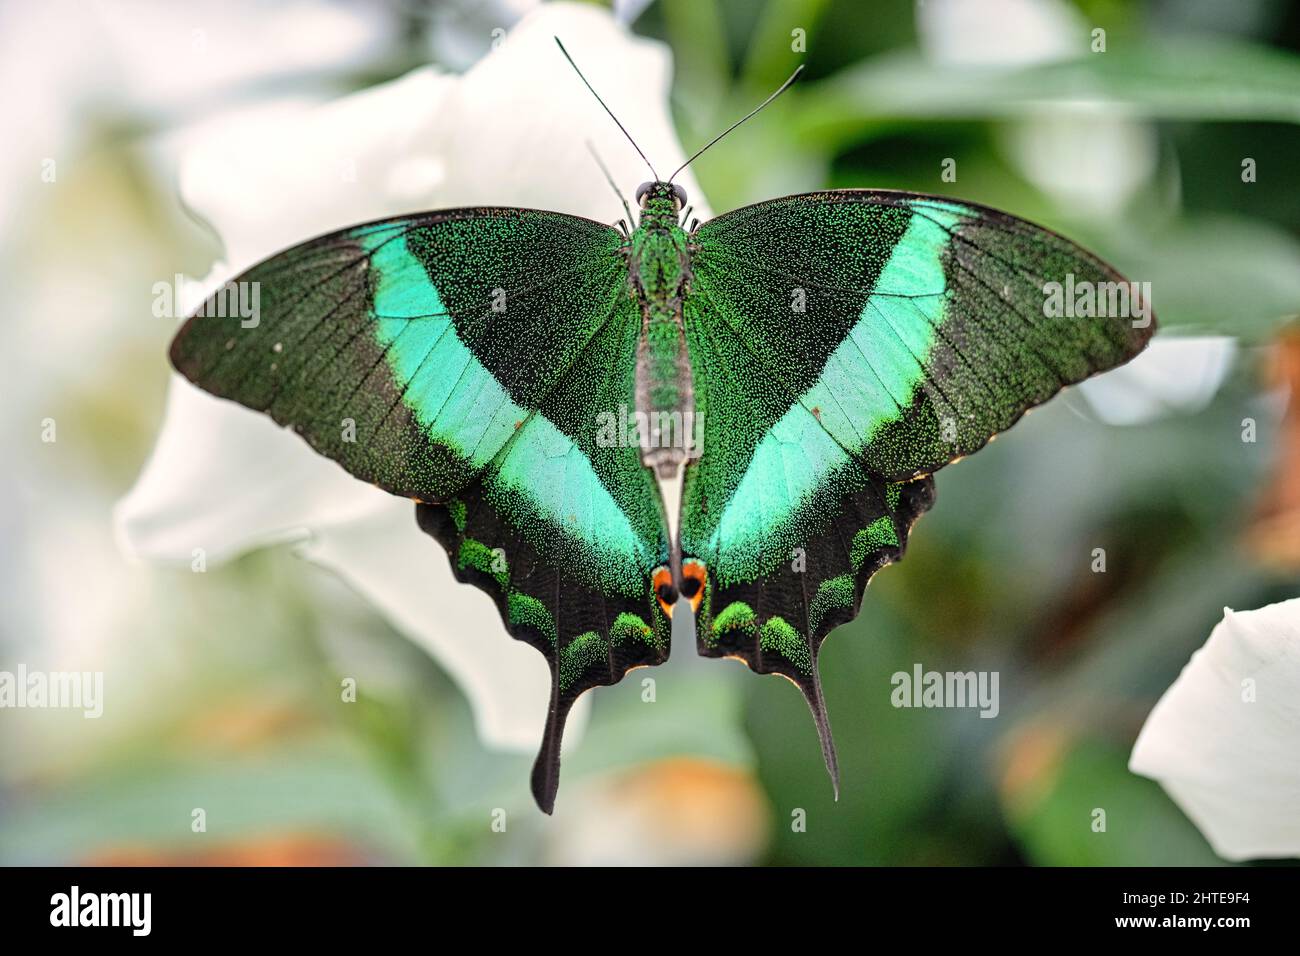 Closeup of an emerald swallowtail in the blurred background Stock Photo